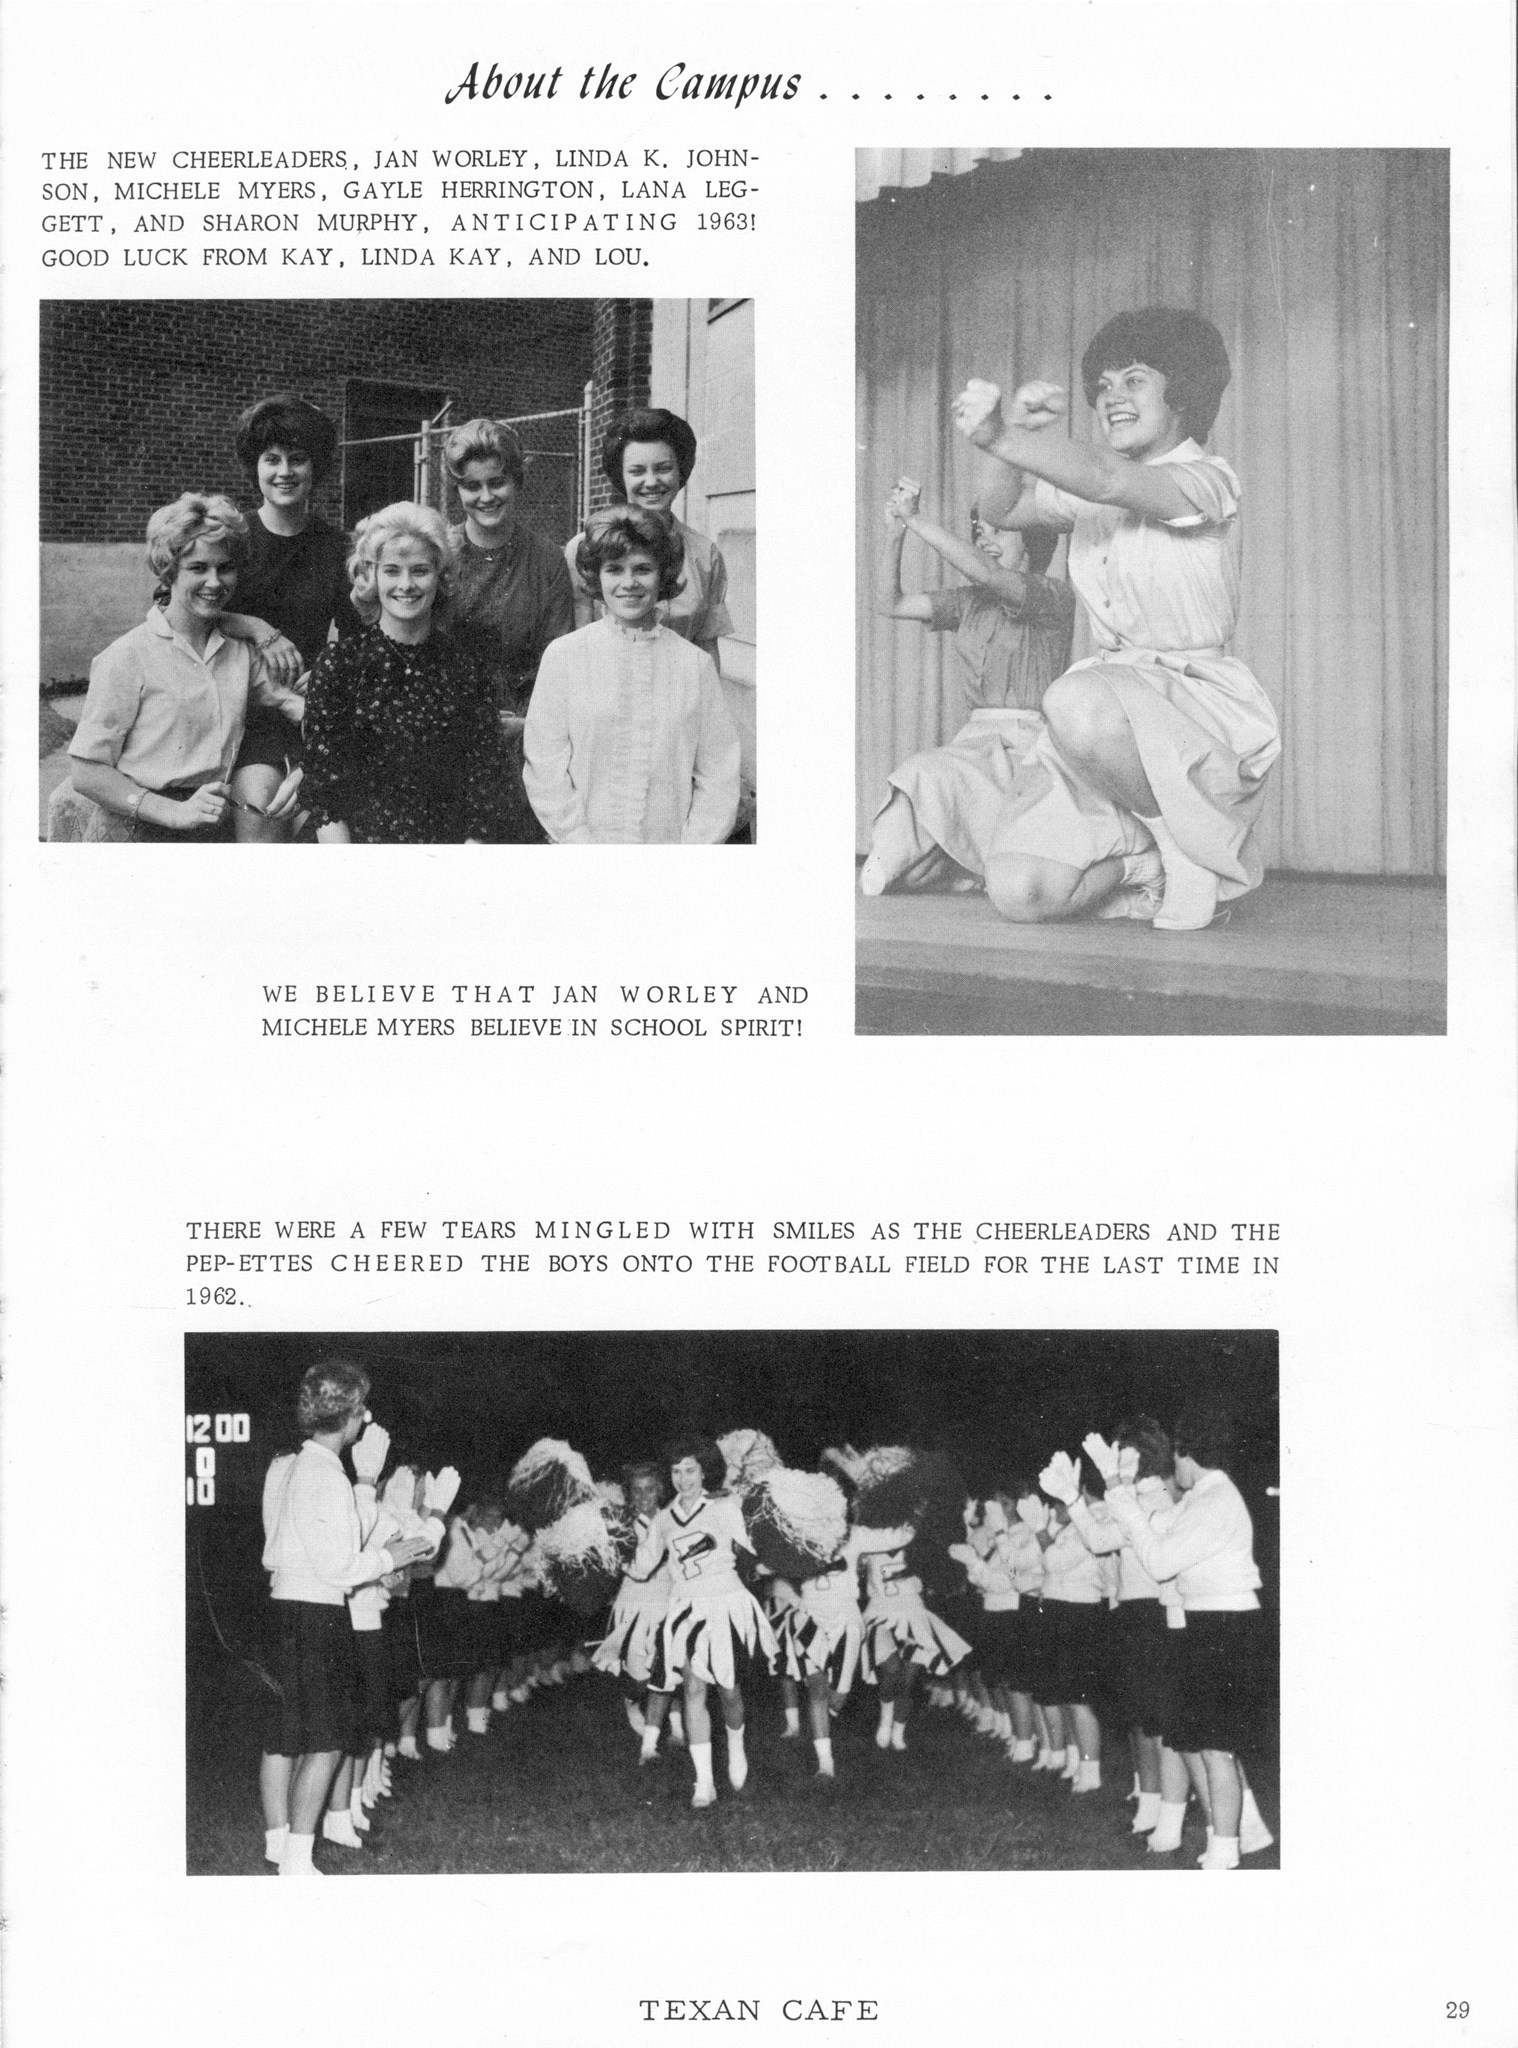 ../../../Images/Large/1962/Arclight-1962-pg0029.jpg